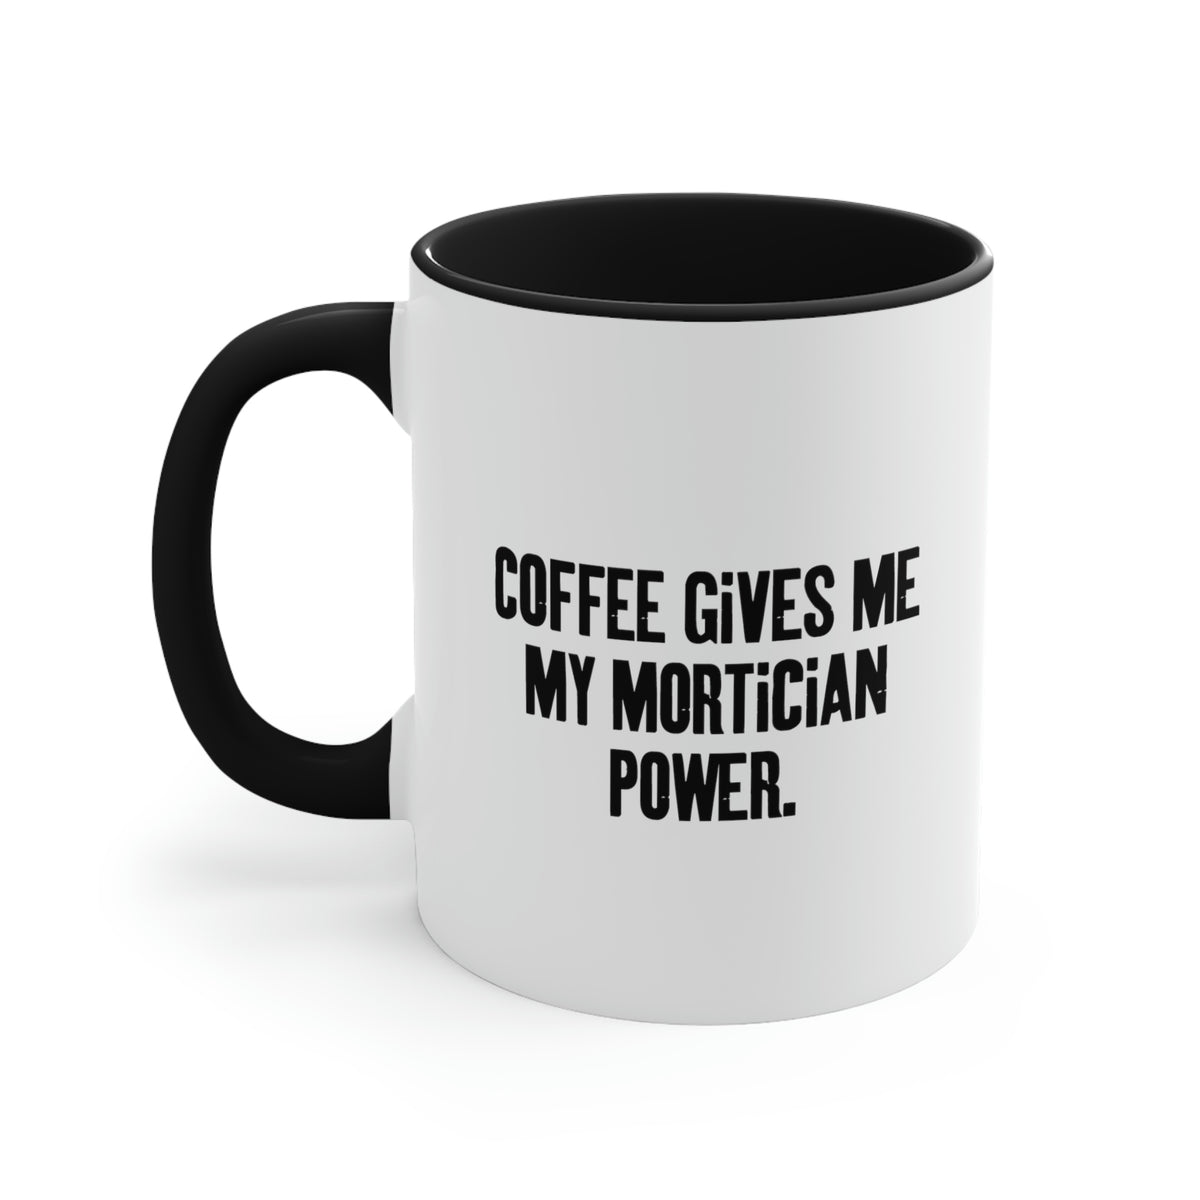 Best Mortician Two Tone 11oz Mug, Coffee Gives Me My Mortician Power, Funny Gifts for Colleagues, Birthday Gifts, Birthday presents, Gift ideas for birthday, Unique birthday gifts, Personalized